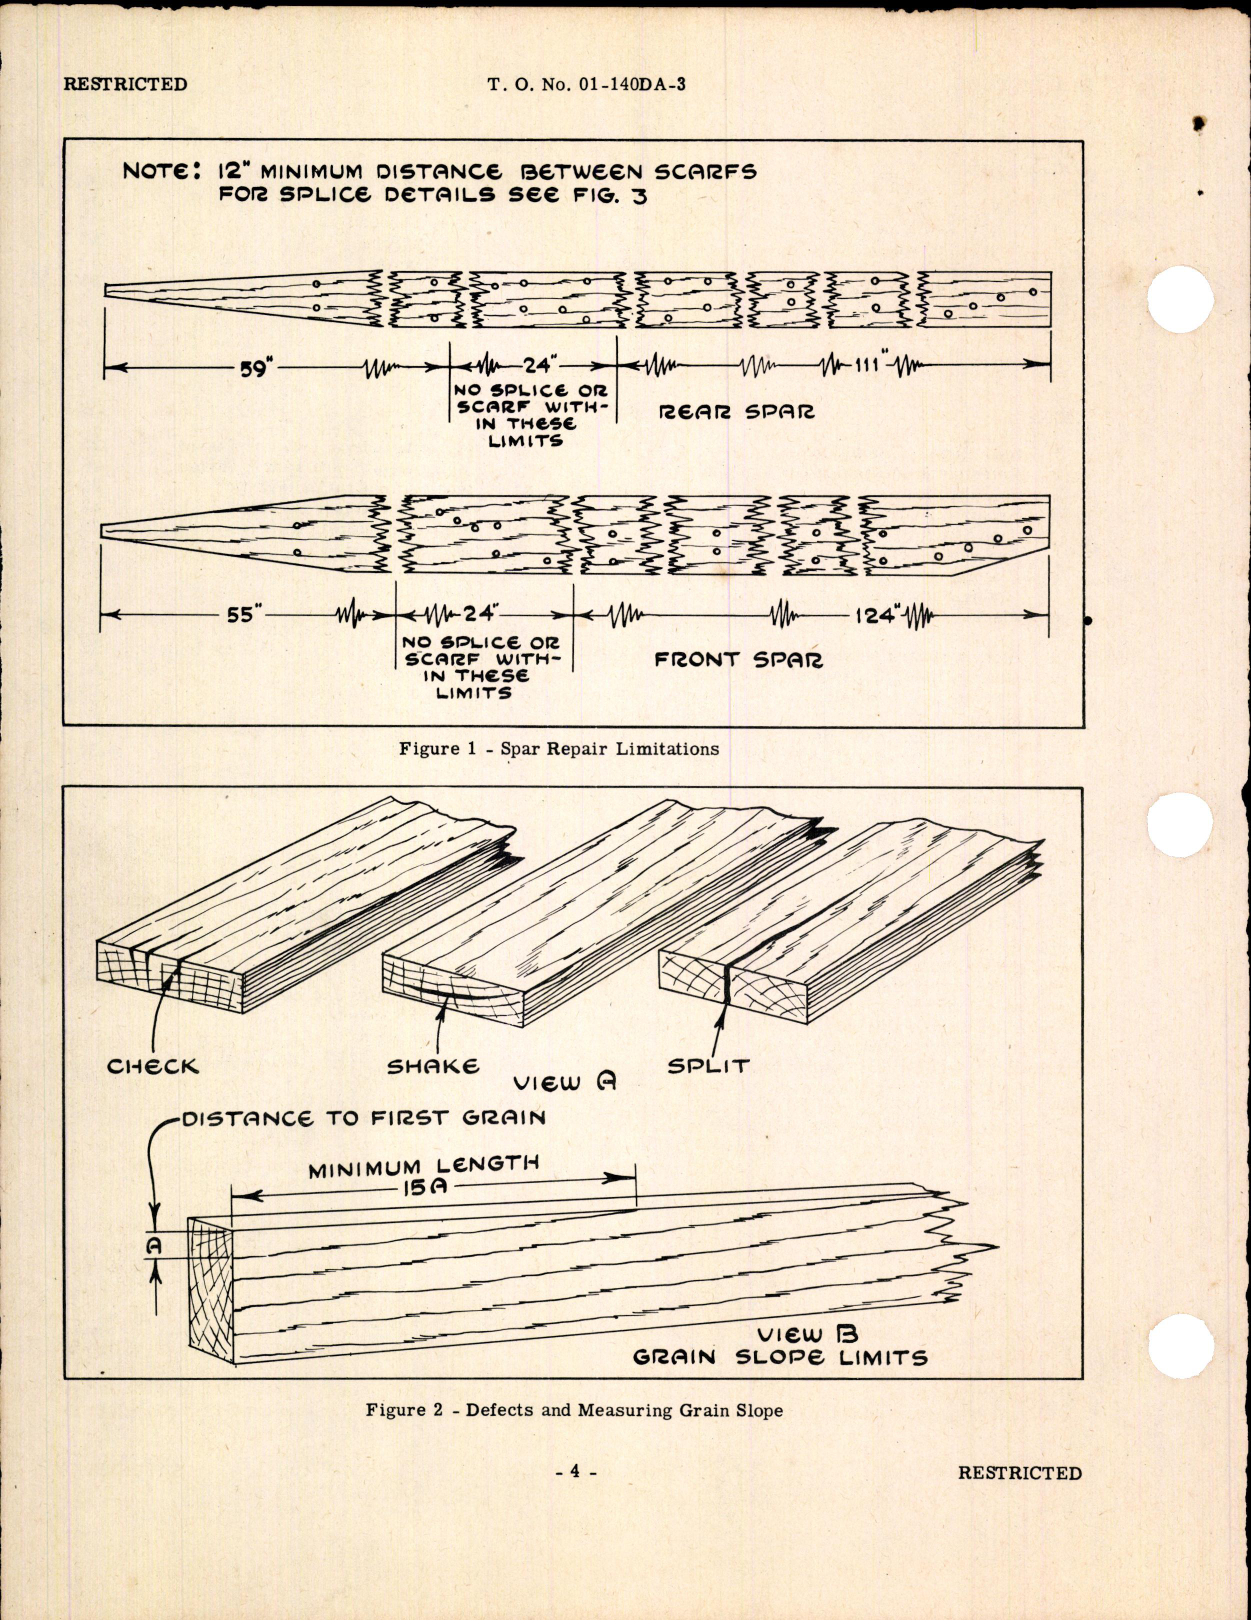 Sample page 6 from AirCorps Library document: Handbook of Instructions for the Structural Repair of the L-4 Series